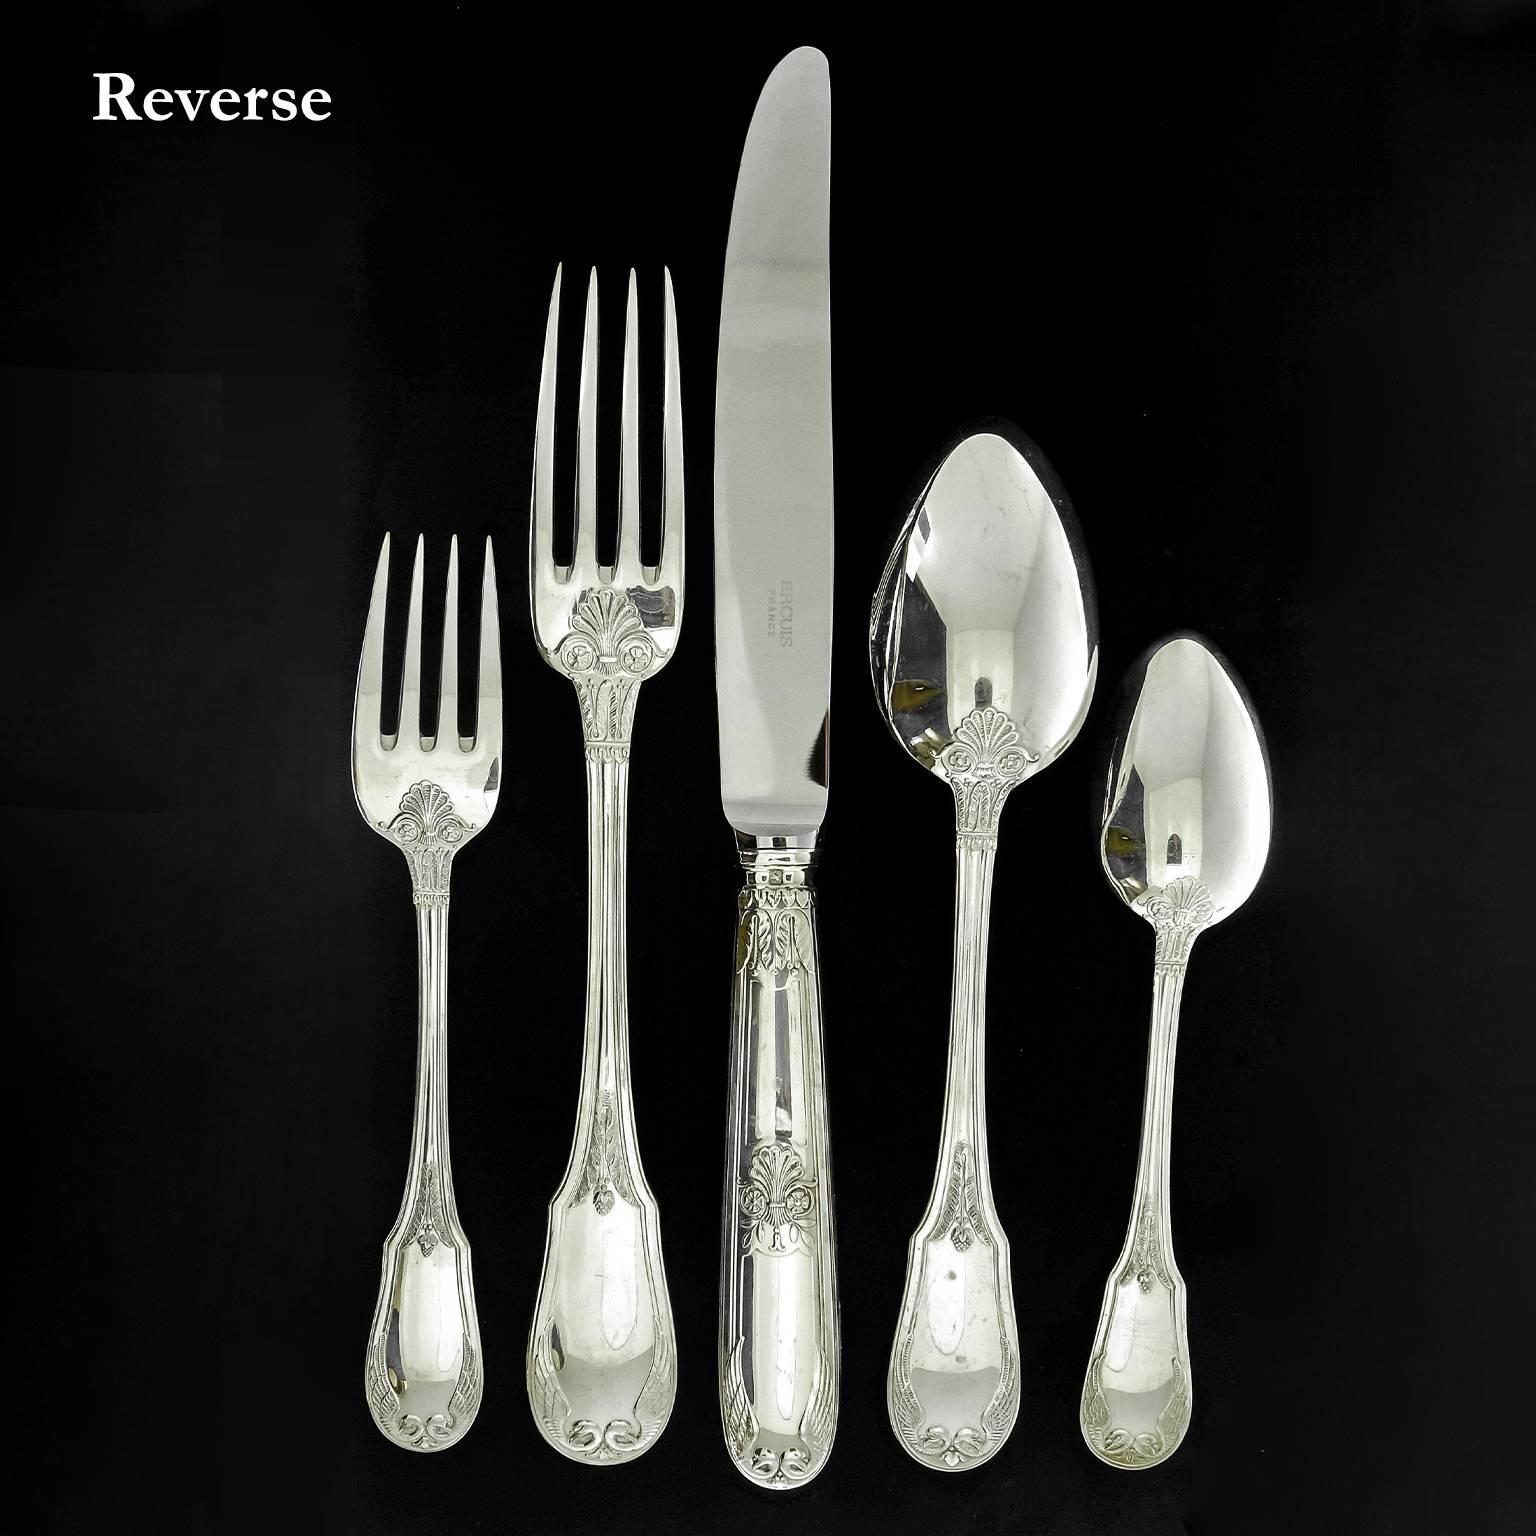 Mid-20th Century Elegant Sterling Flatware Set for 6 by Ercuis of Paris in Empire Pattern